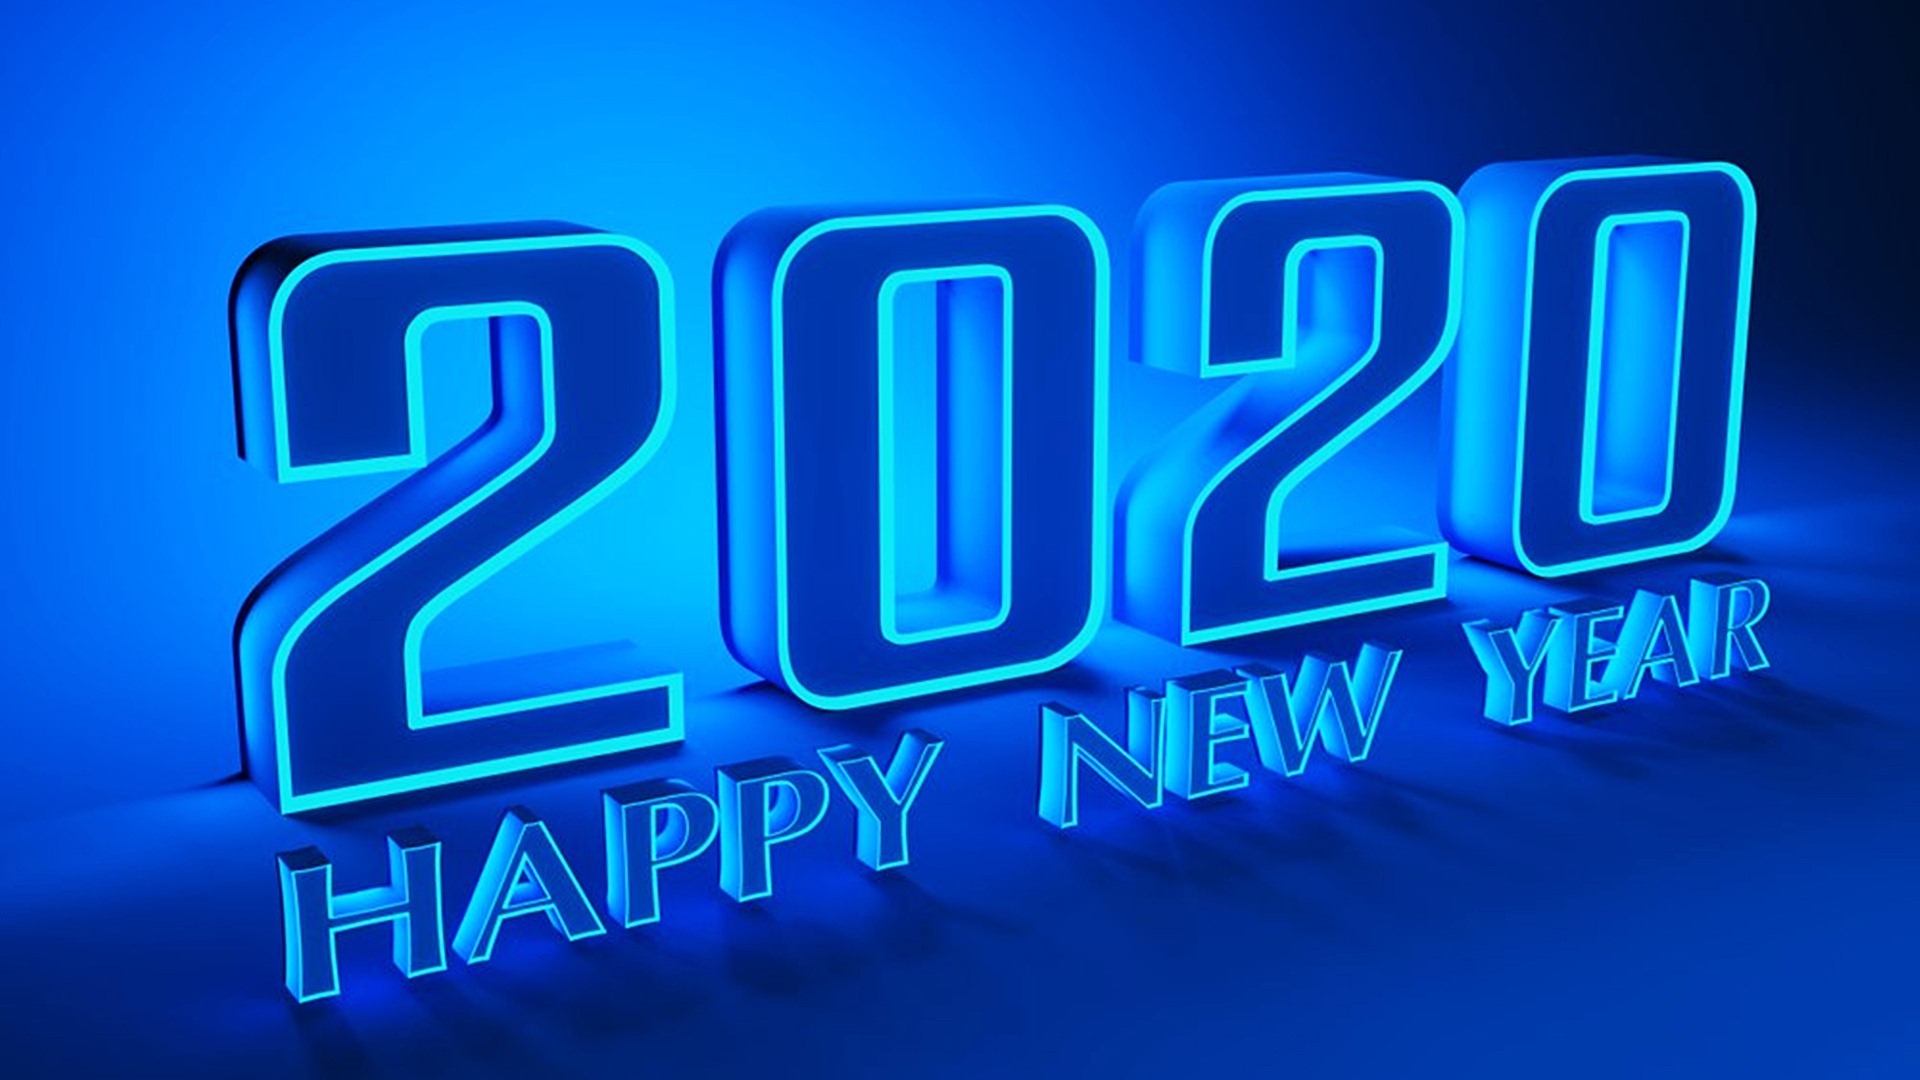 Happy New Year 2020 Wishes Message Quotes Wallapers GIFs Greetings 1920x1080